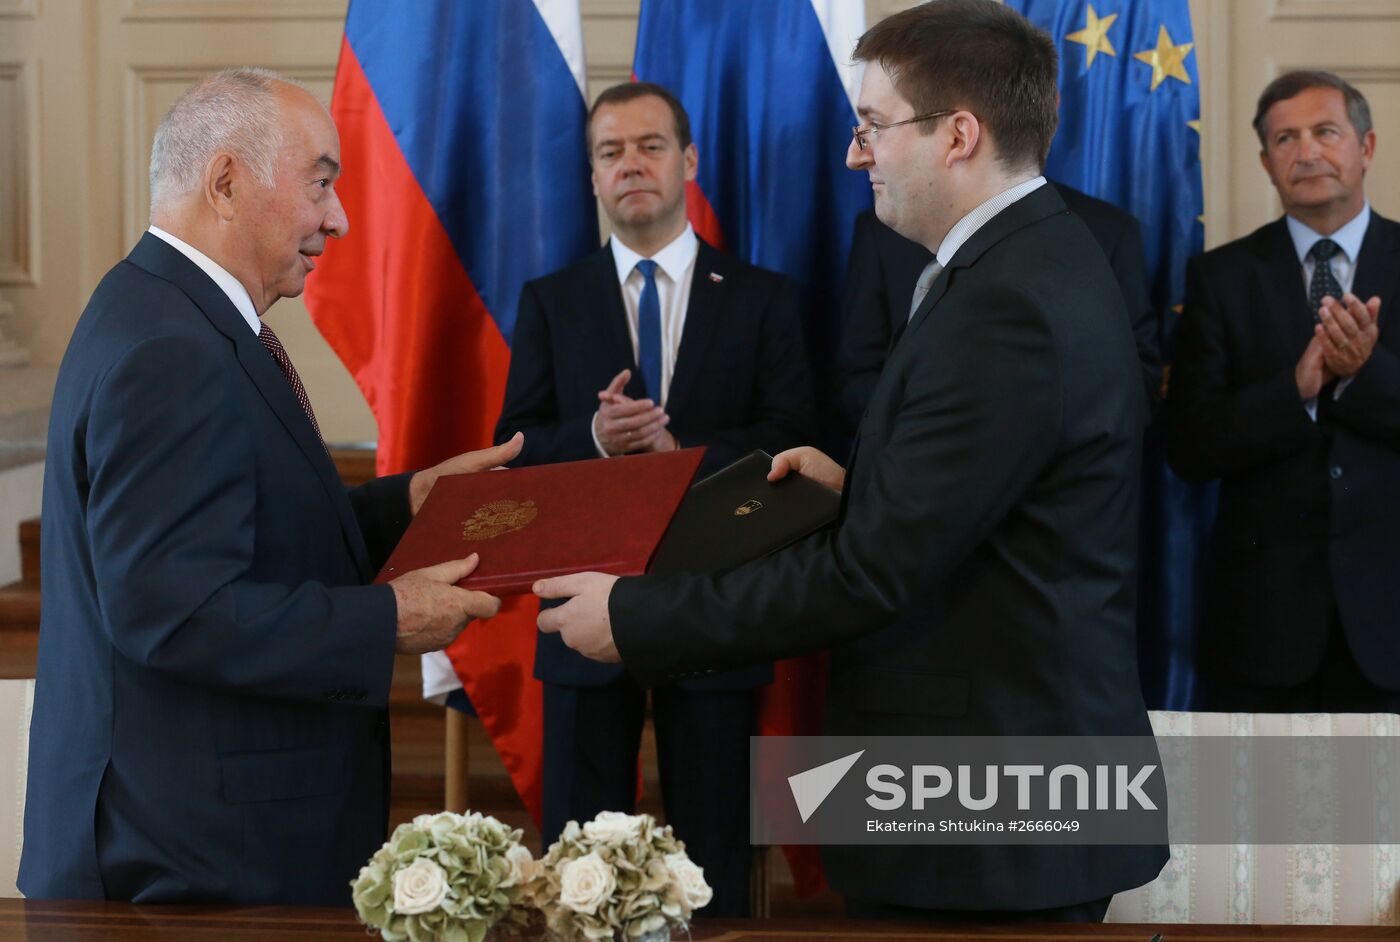 Russian Prime Minister Dmitry Medvedev visits Slovenia. Day Two